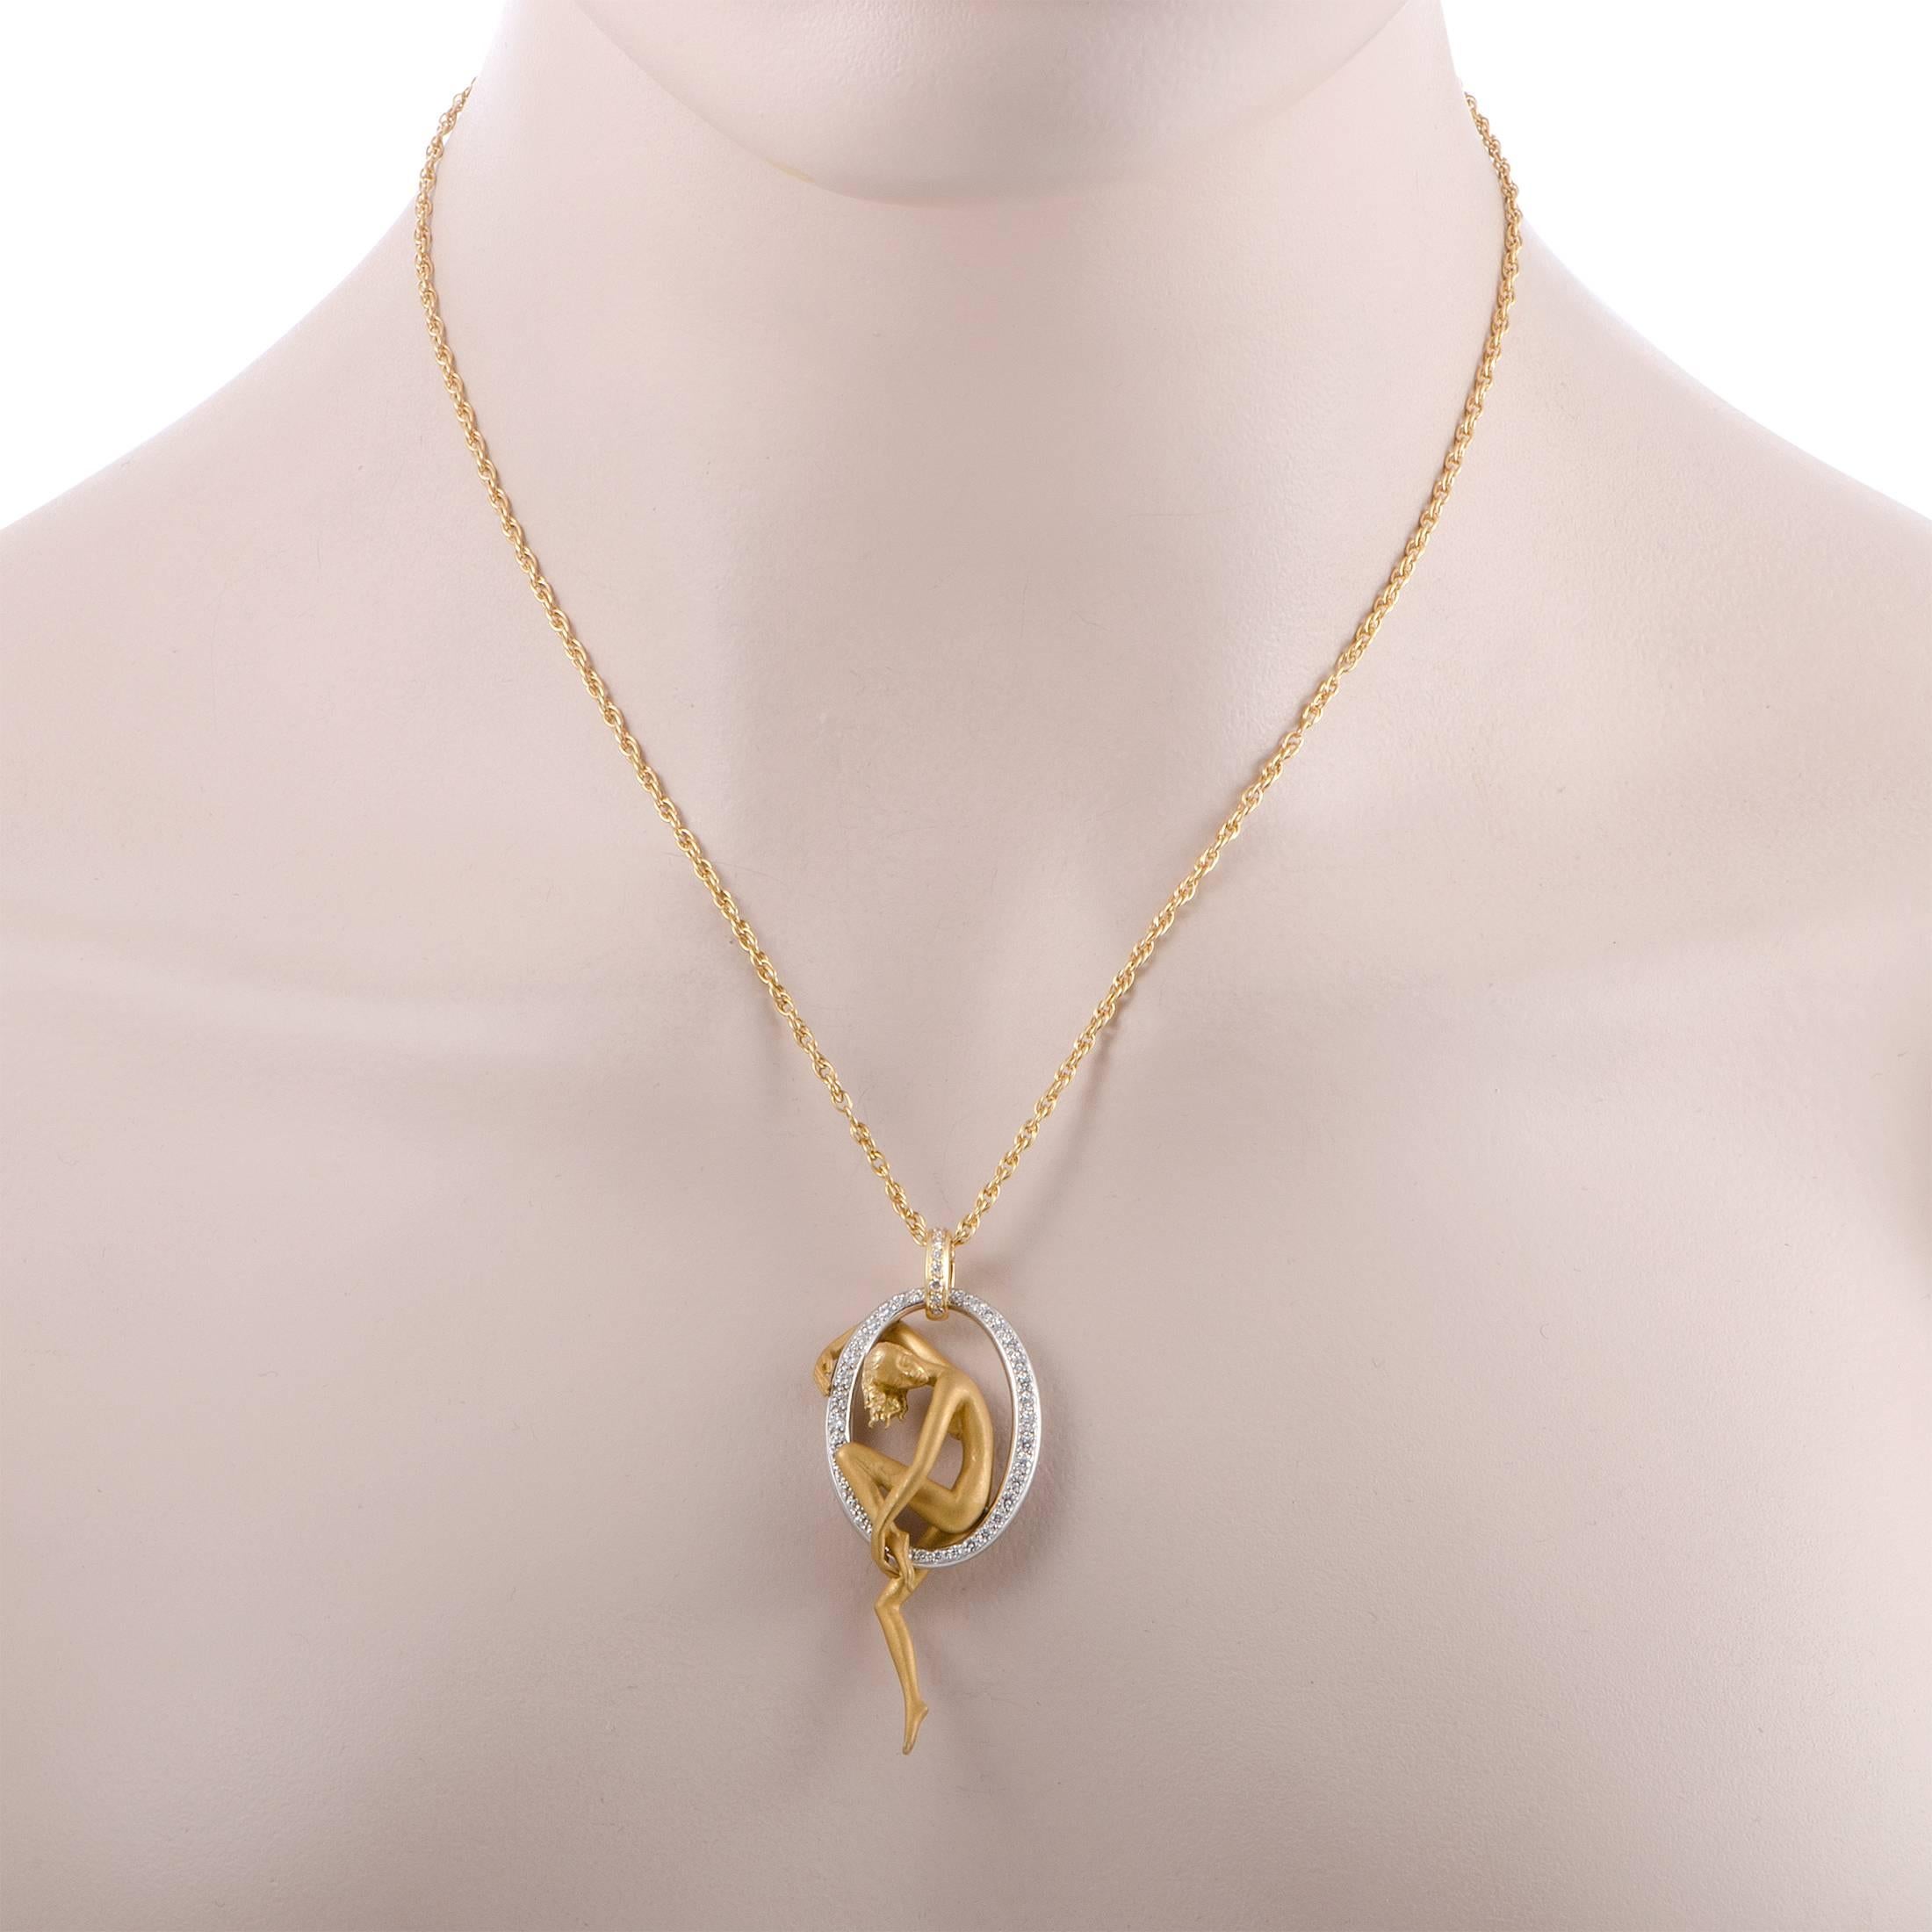 The classy prestigious materials and the gracefully elegant design the brand is known for create a spellbinding effect in this sublime Carrera y Carrera necklace that is made of eye-catching 18K yellow gold, featuring also 18K white gold elements in